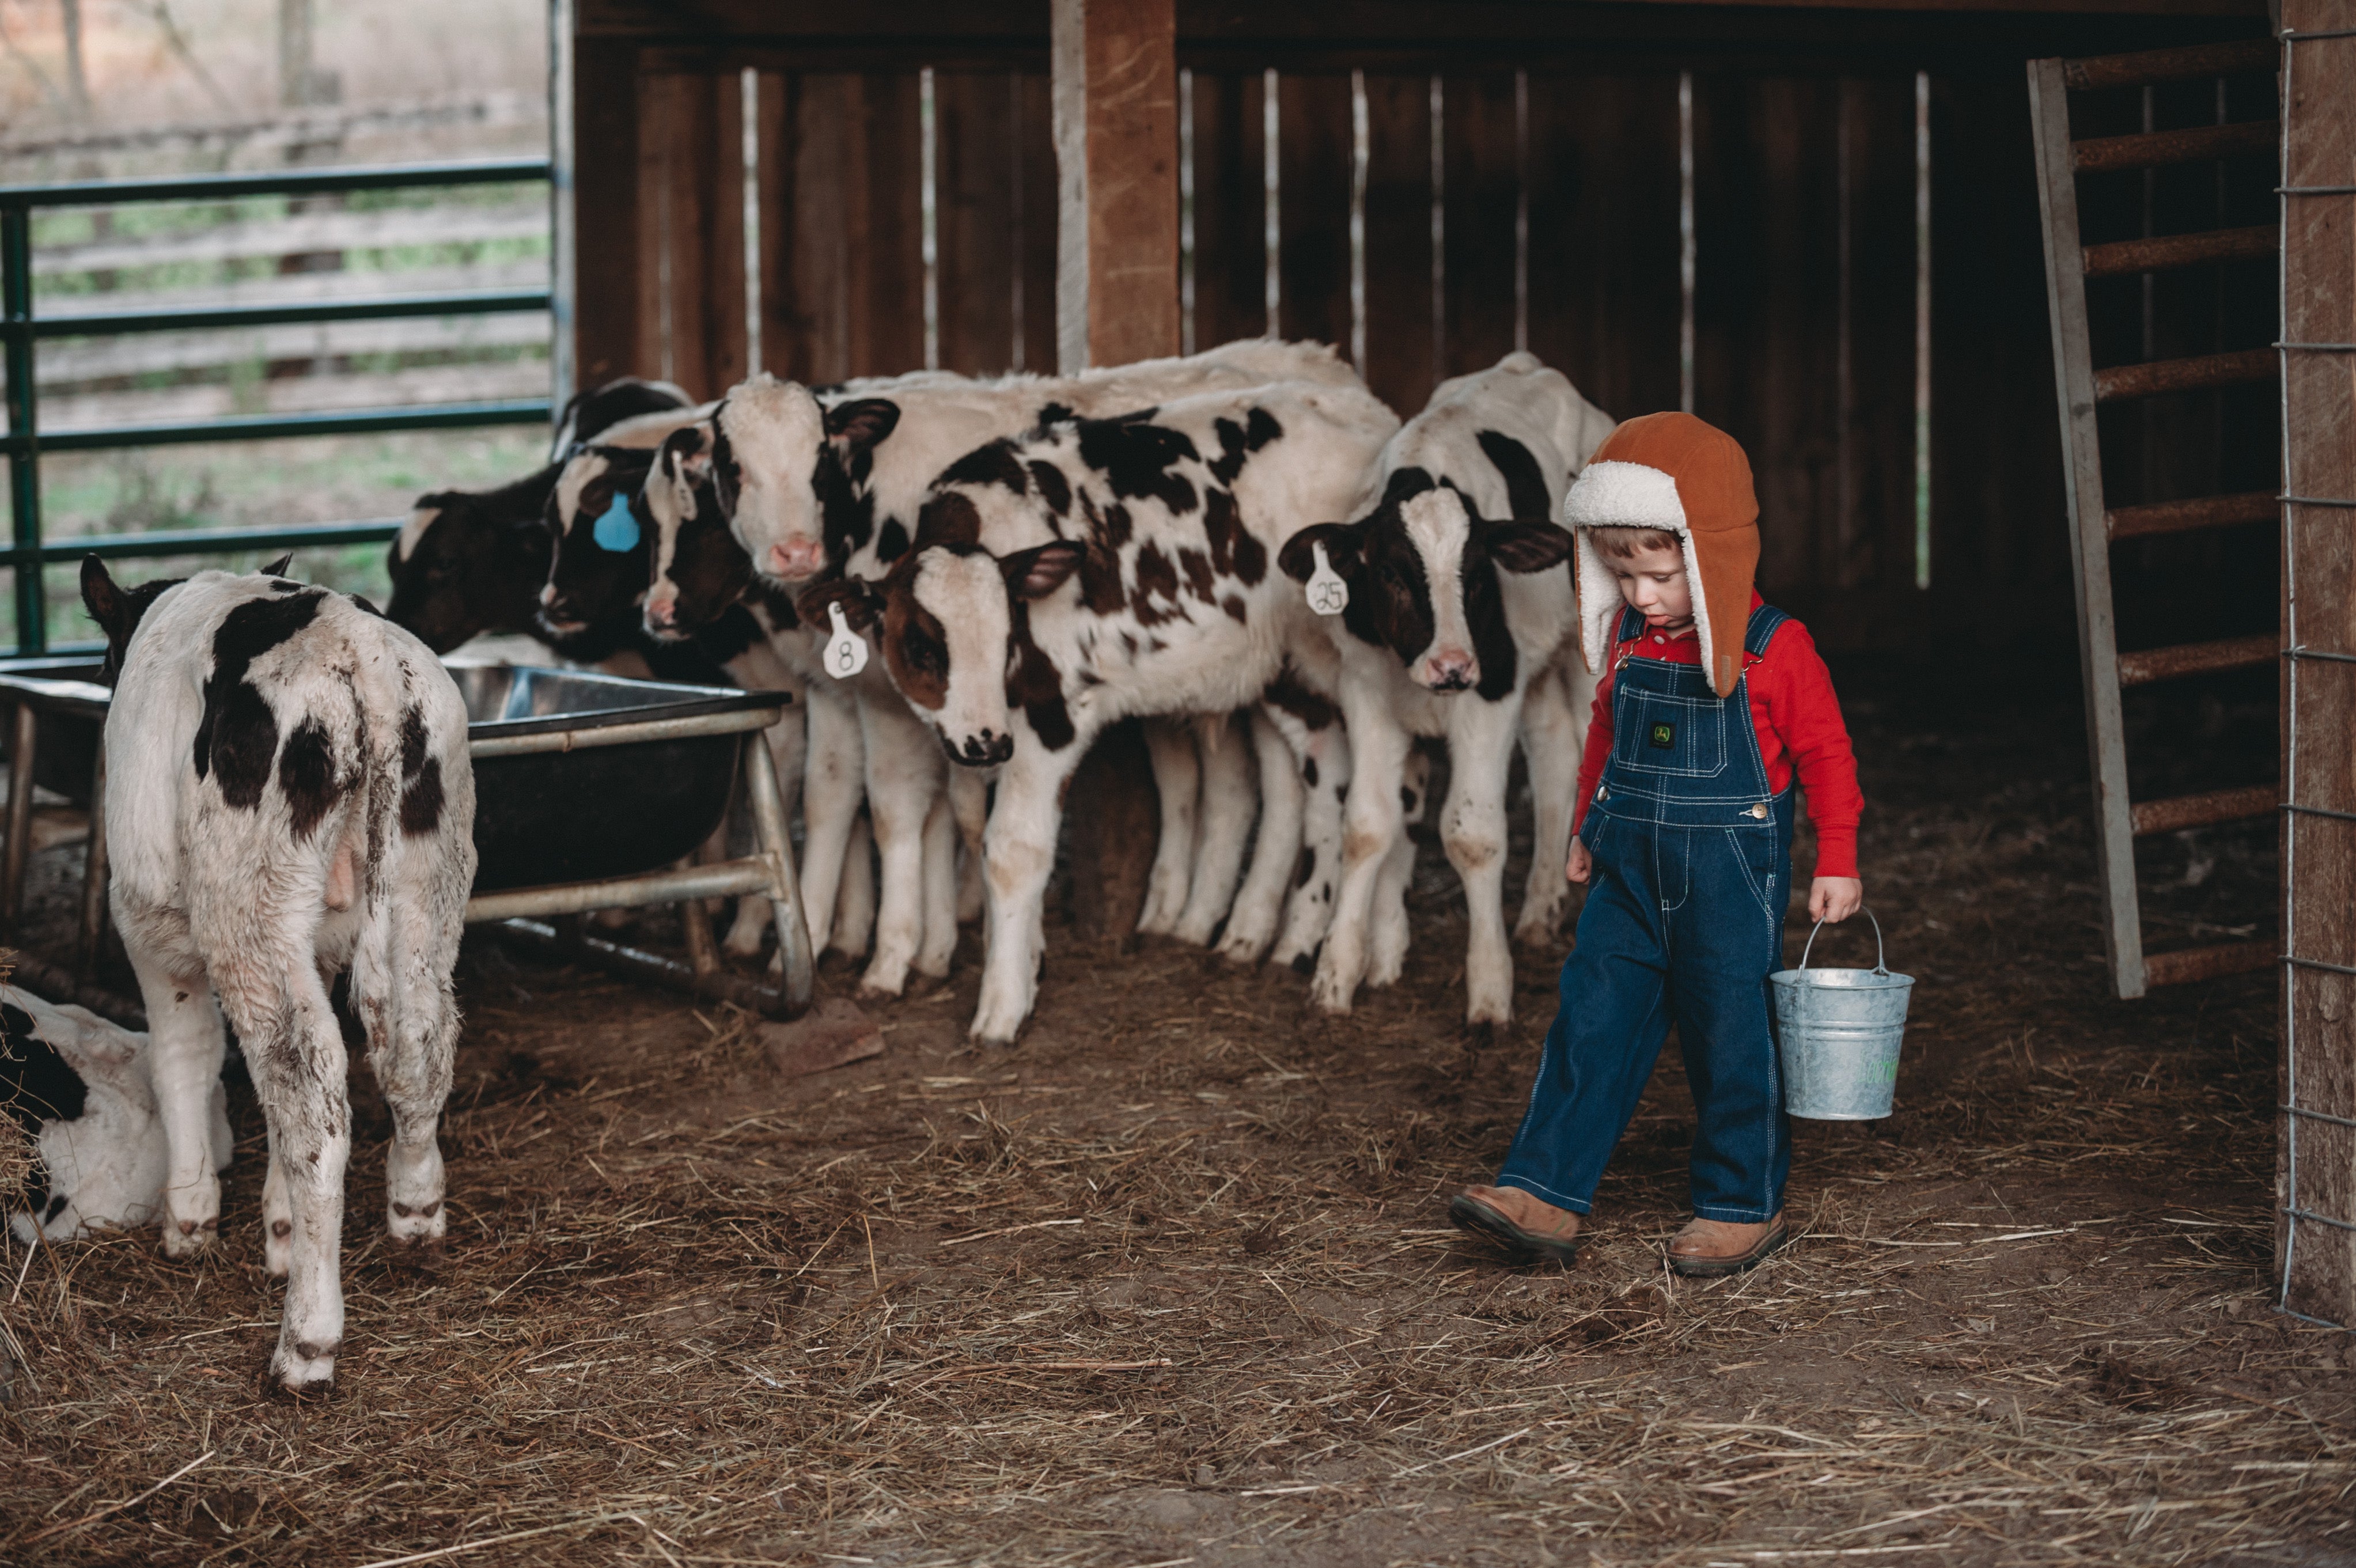 Small boy wearing blue overalls, a red shirt, and a orange hat carrying a bucket in front of several cows. 